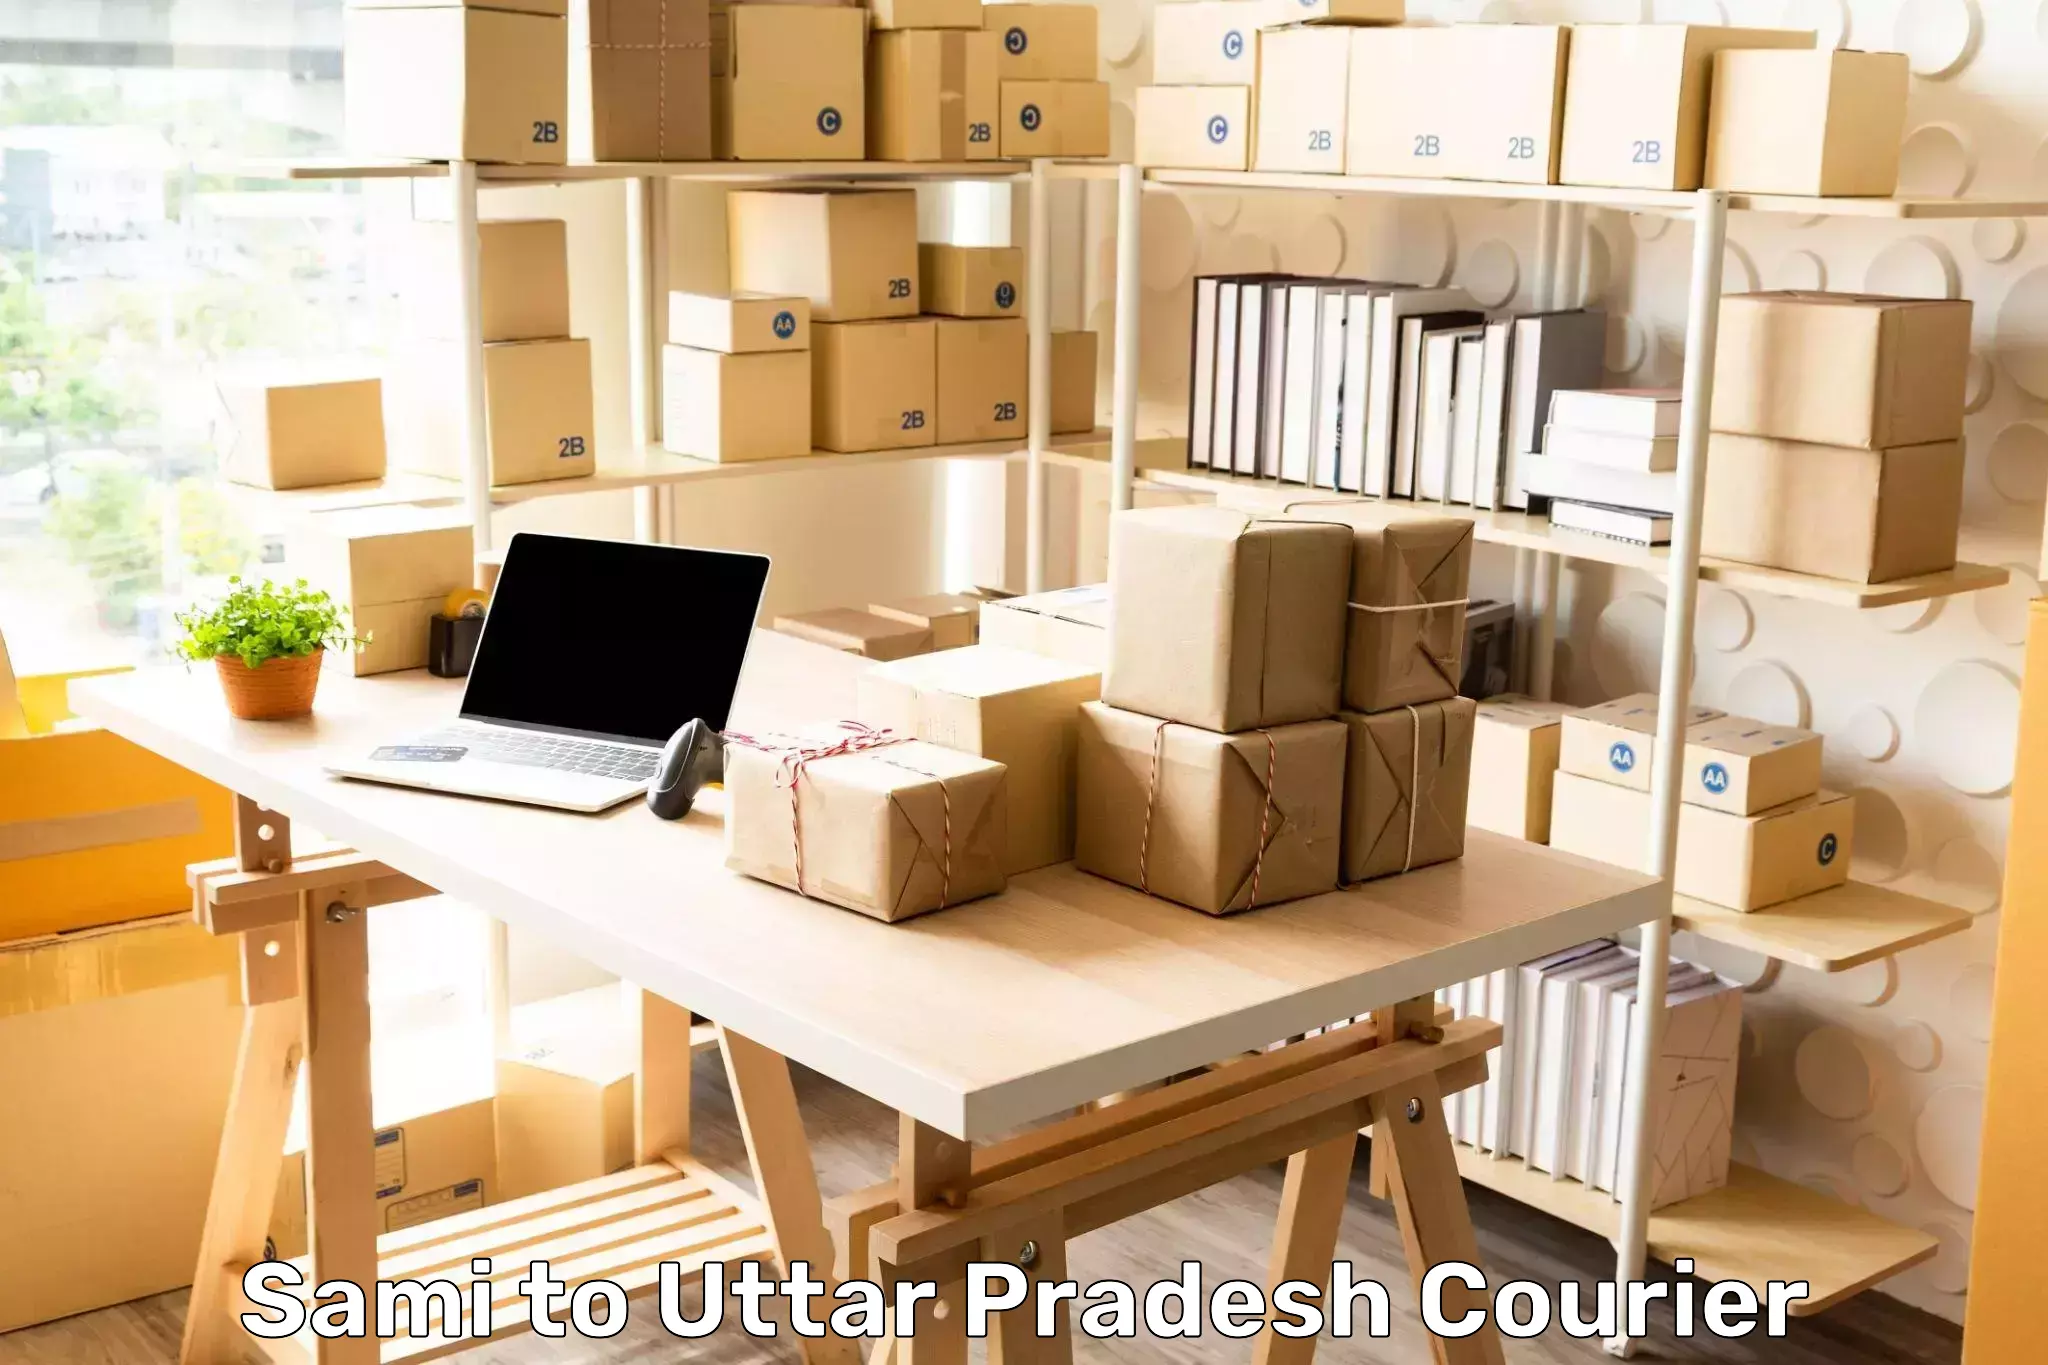 Business courier solutions in Sami to Uttar Pradesh